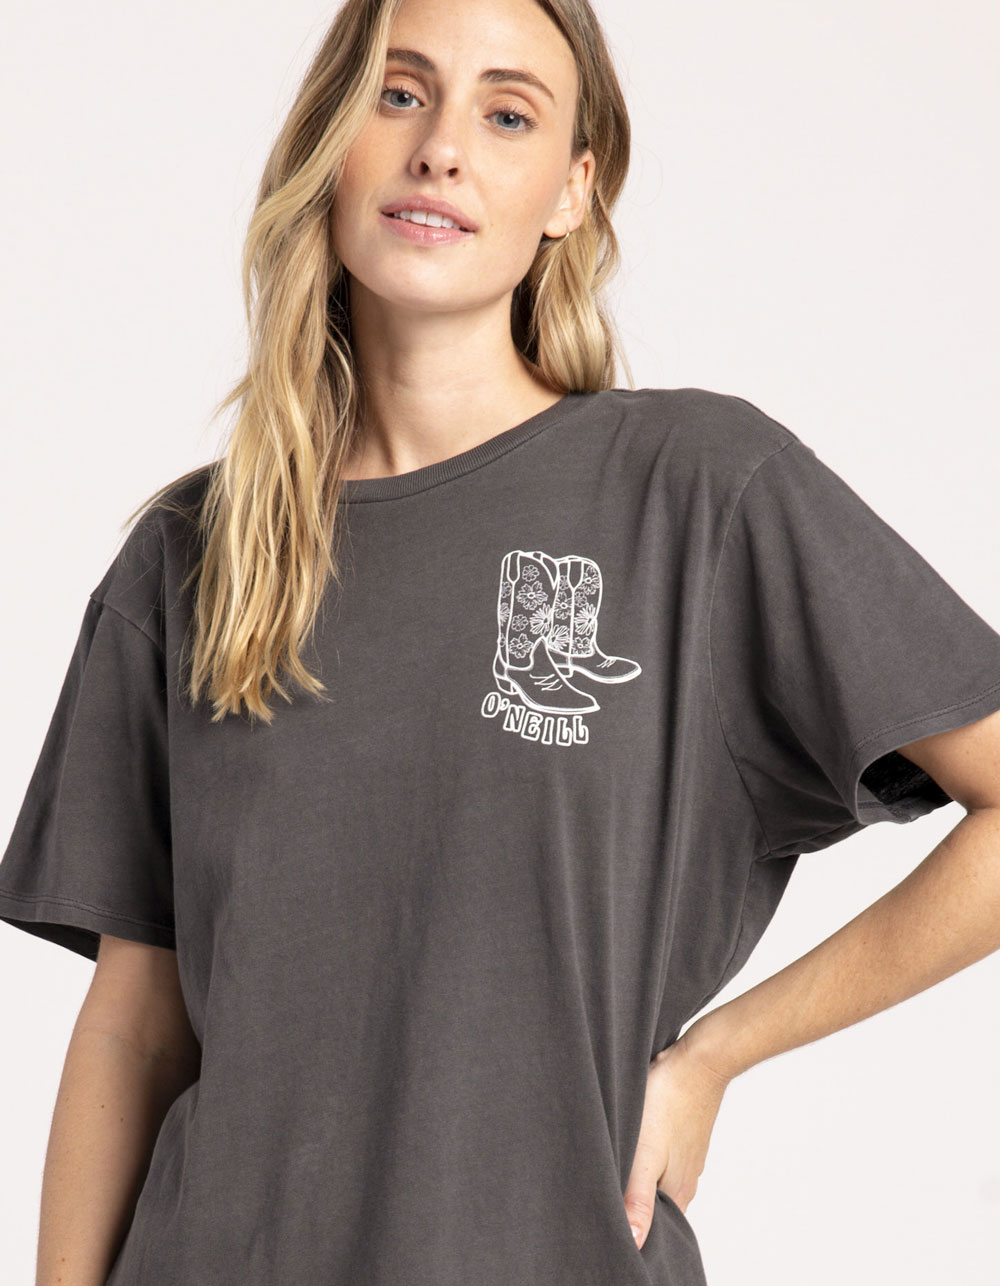 O'NEILL Sunflower Song Womens Tee - WASHED BLACK | Tillys